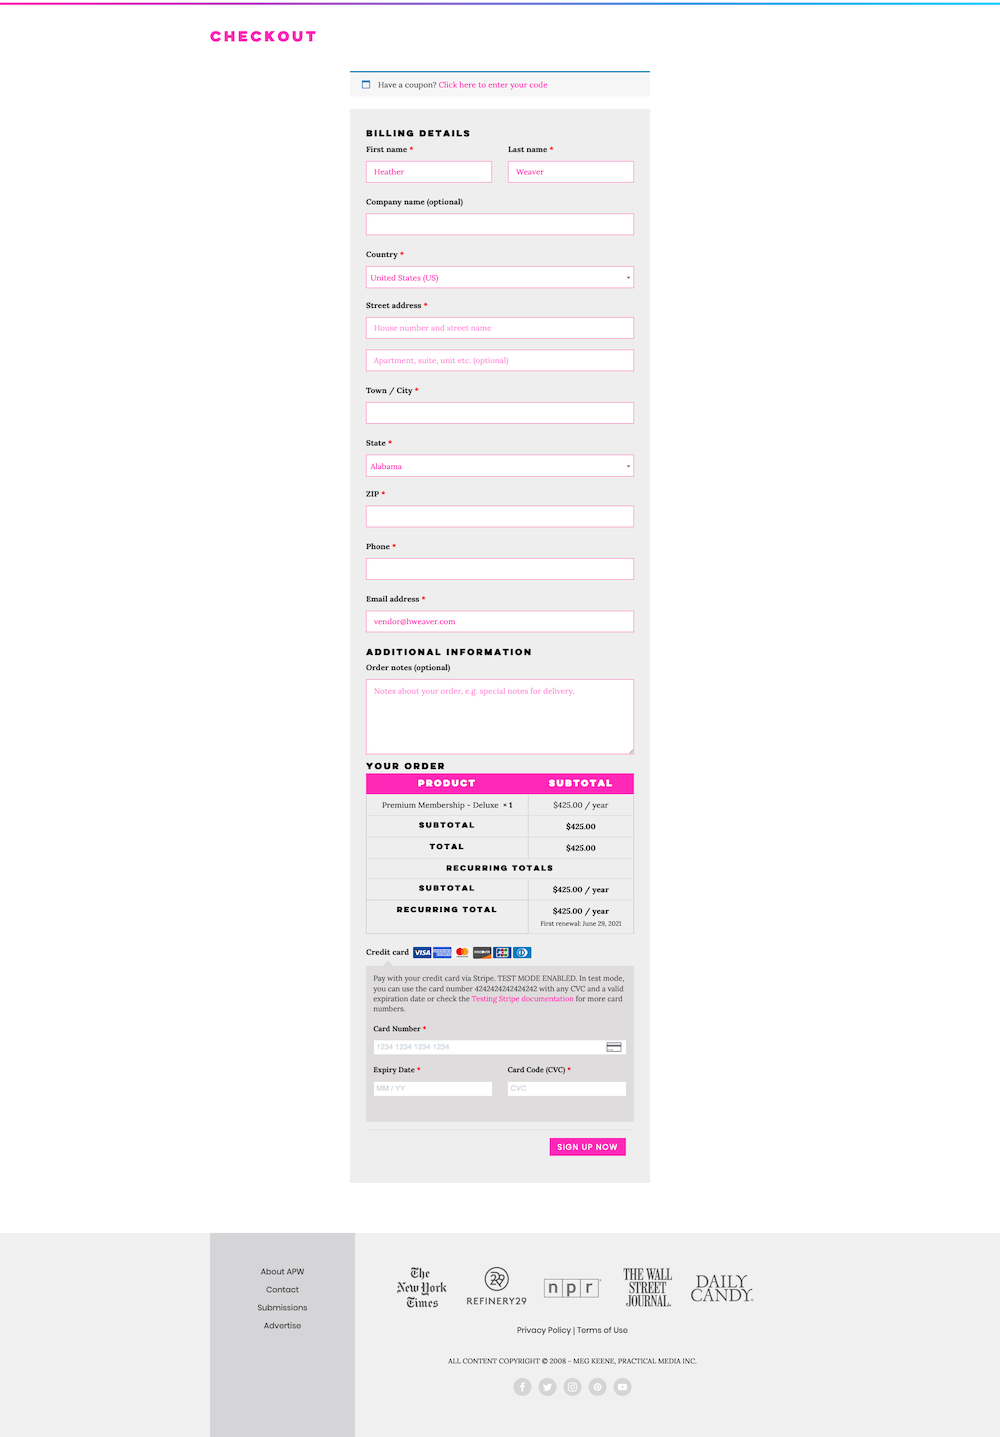 Screenshot of directory checkout page